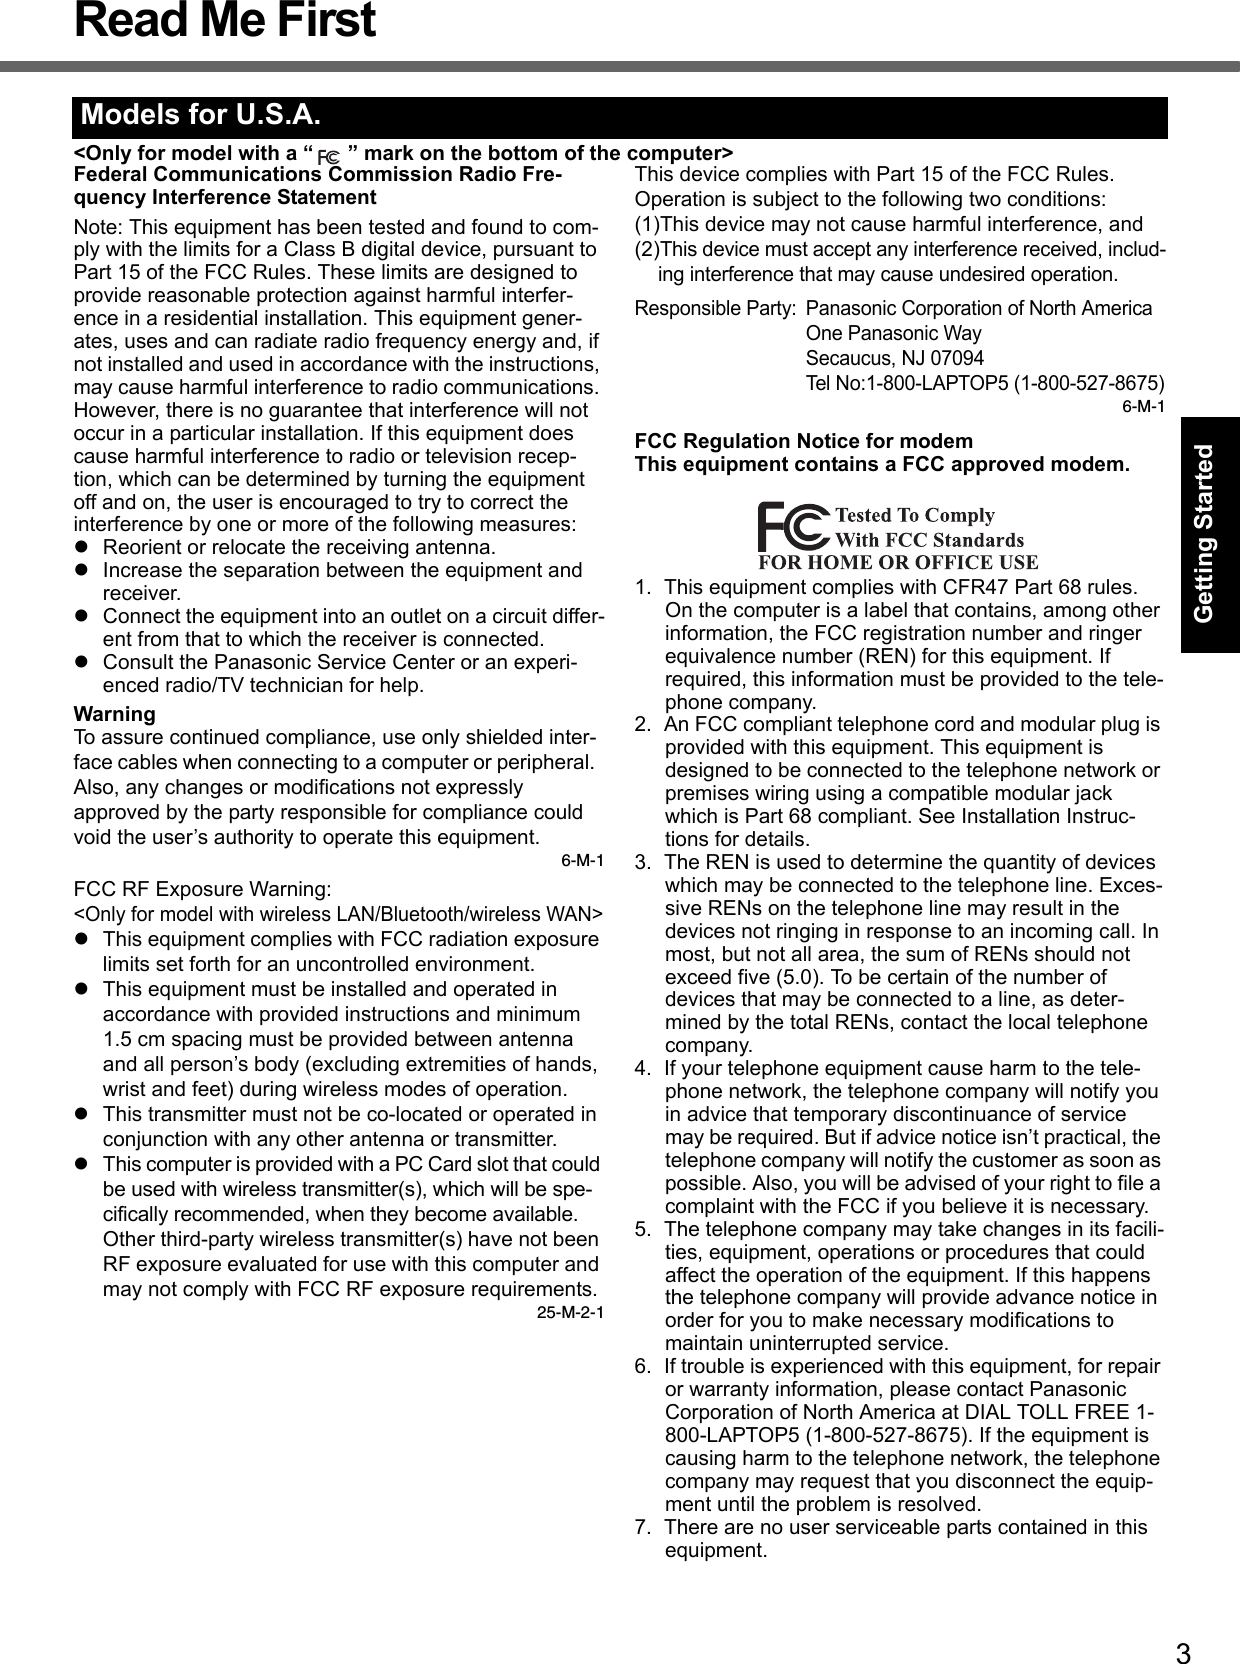 3Getting StartedUseful InformationTroubleshootingAppendixRead Me First&lt;Only for model with a “ ” mark on the bottom of the computer&gt;Federal Communications Commission Radio Fre-quency Interference StatementNote: This equipment has been tested and found to com-ply with the limits for a Class B digital device, pursuant to Part 15 of the FCC Rules. These limits are designed to provide reasonable protection against harmful interfer-ence in a residential installation. This equipment gener-ates, uses and can radiate radio frequency energy and, if not installed and used in accordance with the instructions, may cause harmful interference to radio communications. However, there is no guarantee that interference will not occur in a particular installation. If this equipment does cause harmful interference to radio or television recep-tion, which can be determined by turning the equipment off and on, the user is encouraged to try to correct the interference by one or more of the following measures:zReorient or relocate the receiving antenna.zIncrease the separation between the equipment and receiver.zConnect the equipment into an outlet on a circuit differ-ent from that to which the receiver is connected.zConsult the Panasonic Service Center or an experi-enced radio/TV technician for help.WarningTo assure continued compliance, use only shielded inter-face cables when connecting to a computer or peripheral.  Also, any changes or modifications not expressly approved by the party responsible for compliance could void the user’s authority to operate this equipment.6-M-1FCC RF Exposure Warning:&lt;Only for model with wireless LAN/Bluetooth/wireless WAN&gt;zThis equipment complies with FCC radiation exposure limits set forth for an uncontrolled environment.zThis equipment must be installed and operated in accordance with provided instructions and minimum 1.5 cm spacing must be provided between antenna and all person’s body (excluding extremities of hands, wrist and feet) during wireless modes of operation.zThis transmitter must not be co-located or operated in conjunction with any other antenna or transmitter.zThis computer is provided with a PC Card slot that could be used with wireless transmitter(s), which will be spe-cifically recommended, when they become available.Other third-party wireless transmitter(s) have not been RF exposure evaluated for use with this computer and may not comply with FCC RF exposure requirements.25-M-2-1This device complies with Part 15 of the FCC Rules.  Operation is subject to the following two conditions:(1)This device may not cause harmful interference, and(2)This device must accept any interference received, includ-ing interference that may cause undesired operation.Responsible Party: Panasonic Corporation of North AmericaOne Panasonic WaySecaucus, NJ 07094Tel No:1-800-LAPTOP5 (1-800-527-8675)6-M-1FCC Regulation Notice for modemThis equipment contains a FCC approved modem.1. This equipment complies with CFR47 Part 68 rules. On the computer is a label that contains, among other information, the FCC registration number and ringer equivalence number (REN) for this equipment. If required, this information must be provided to the tele-phone company.2. An FCC compliant telephone cord and modular plug is provided with this equipment. This equipment is designed to be connected to the telephone network or premises wiring using a compatible modular jack which is Part 68 compliant. See Installation Instruc-tions for details.3. The REN is used to determine the quantity of devices which may be connected to the telephone line. Exces-sive RENs on the telephone line may result in the devices not ringing in response to an incoming call. In most, but not all area, the sum of RENs should not exceed five (5.0). To be certain of the number of devices that may be connected to a line, as deter-mined by the total RENs, contact the local telephone company.4. If your telephone equipment cause harm to the tele-phone network, the telephone company will notify you in advice that temporary discontinuance of service may be required. But if advice notice isn’t practical, the telephone company will notify the customer as soon as possible. Also, you will be advised of your right to file a complaint with the FCC if you believe it is necessary.5. The telephone company may take changes in its facili-ties, equipment, operations or procedures that could affect the operation of the equipment. If this happens the telephone company will provide advance notice in order for you to make necessary modifications to maintain uninterrupted service.6. If trouble is experienced with this equipment, for repair or warranty information, please contact Panasonic Corporation of North America at DIAL TOLL FREE 1-800-LAPTOP5 (1-800-527-8675). If the equipment is causing harm to the telephone network, the telephone company may request that you disconnect the equip-ment until the problem is resolved.7. There are no user serviceable parts contained in this equipment.Models for U.S.A.